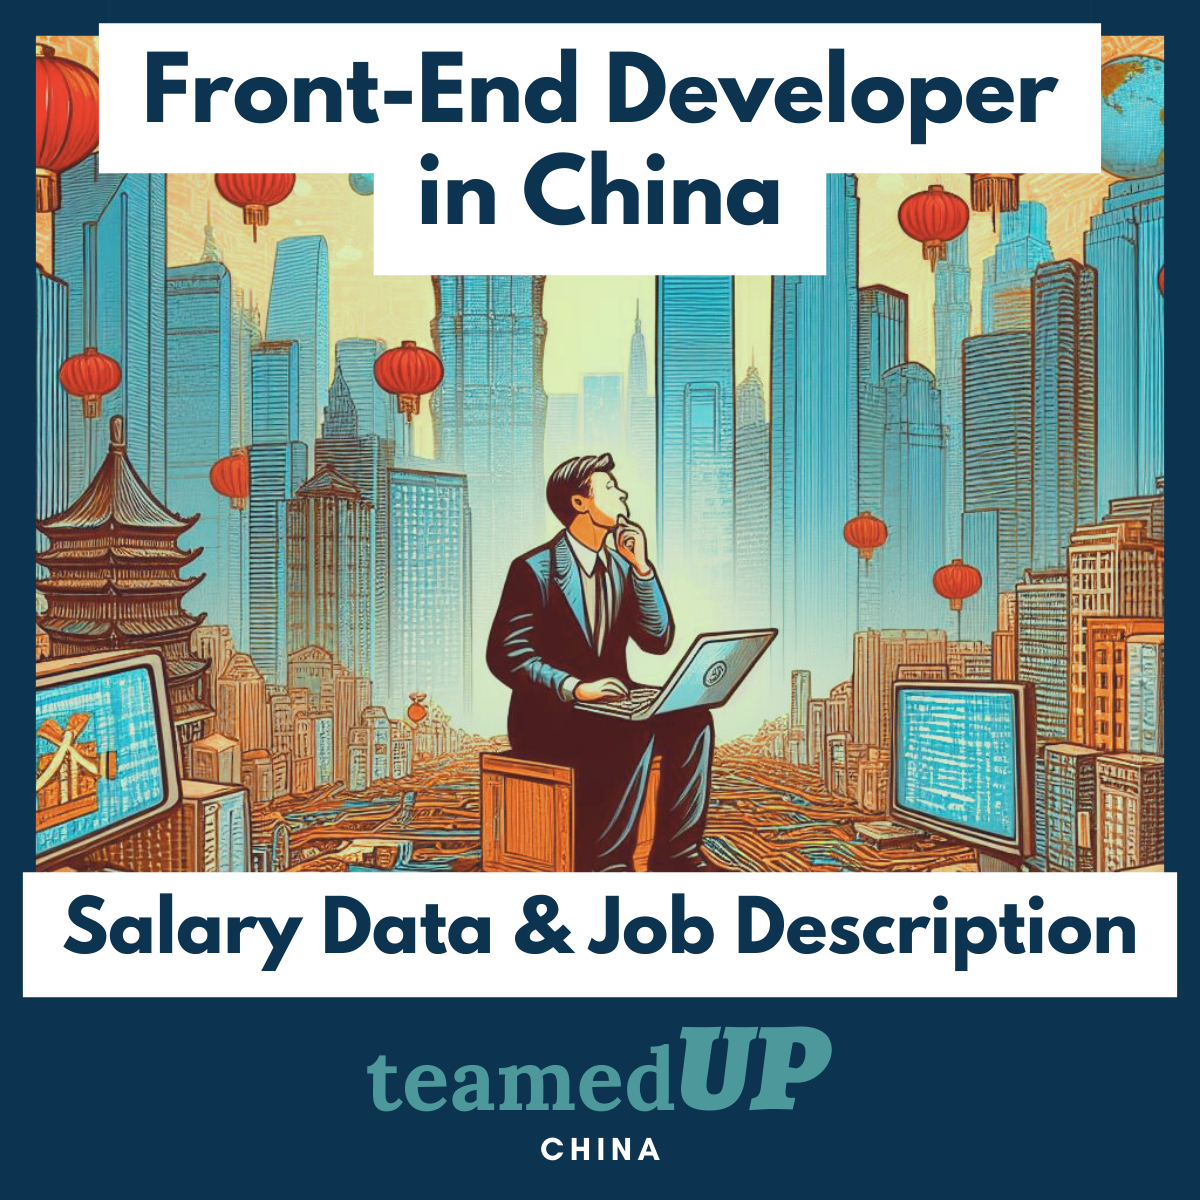 Front-End Developer in China: Average Salary and JD - TeamedUp China